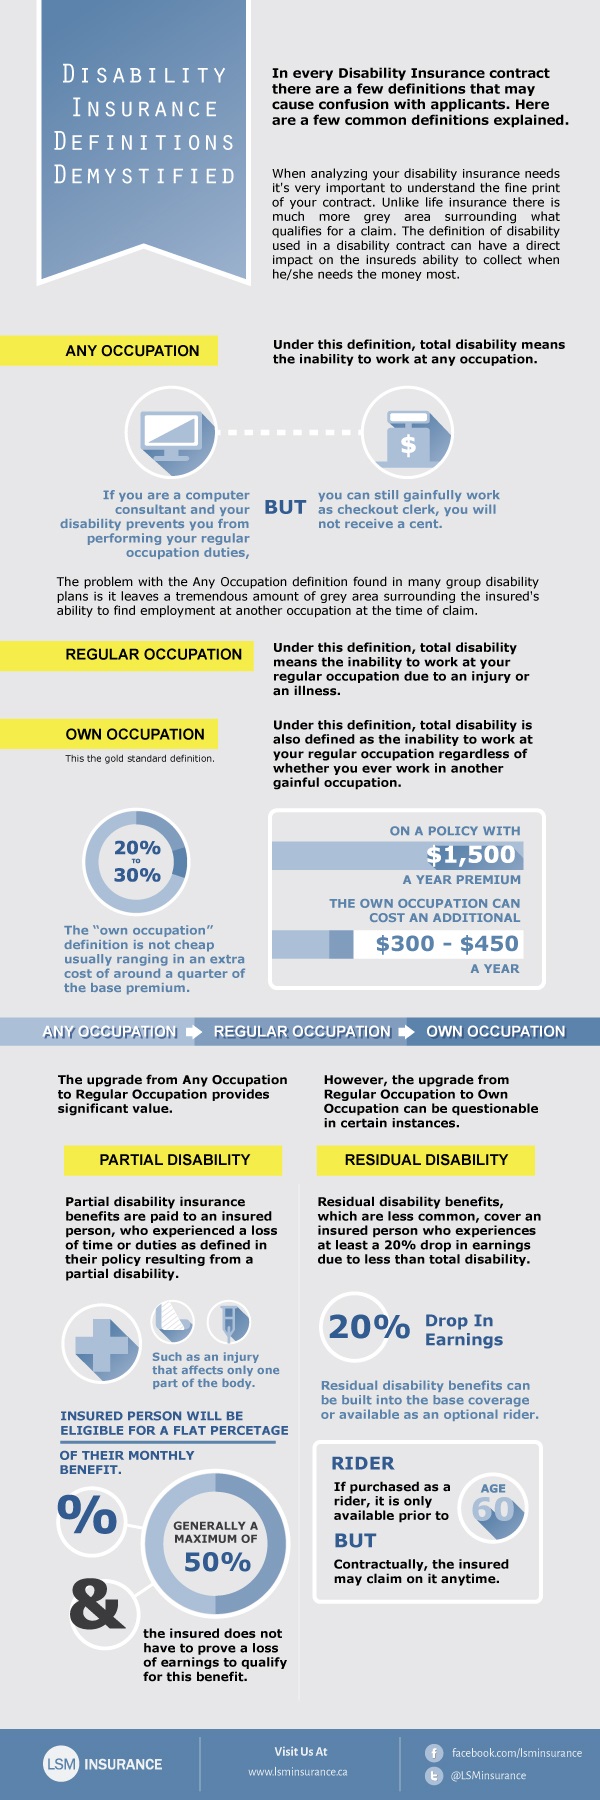 Disability Insurance Definition Demystified